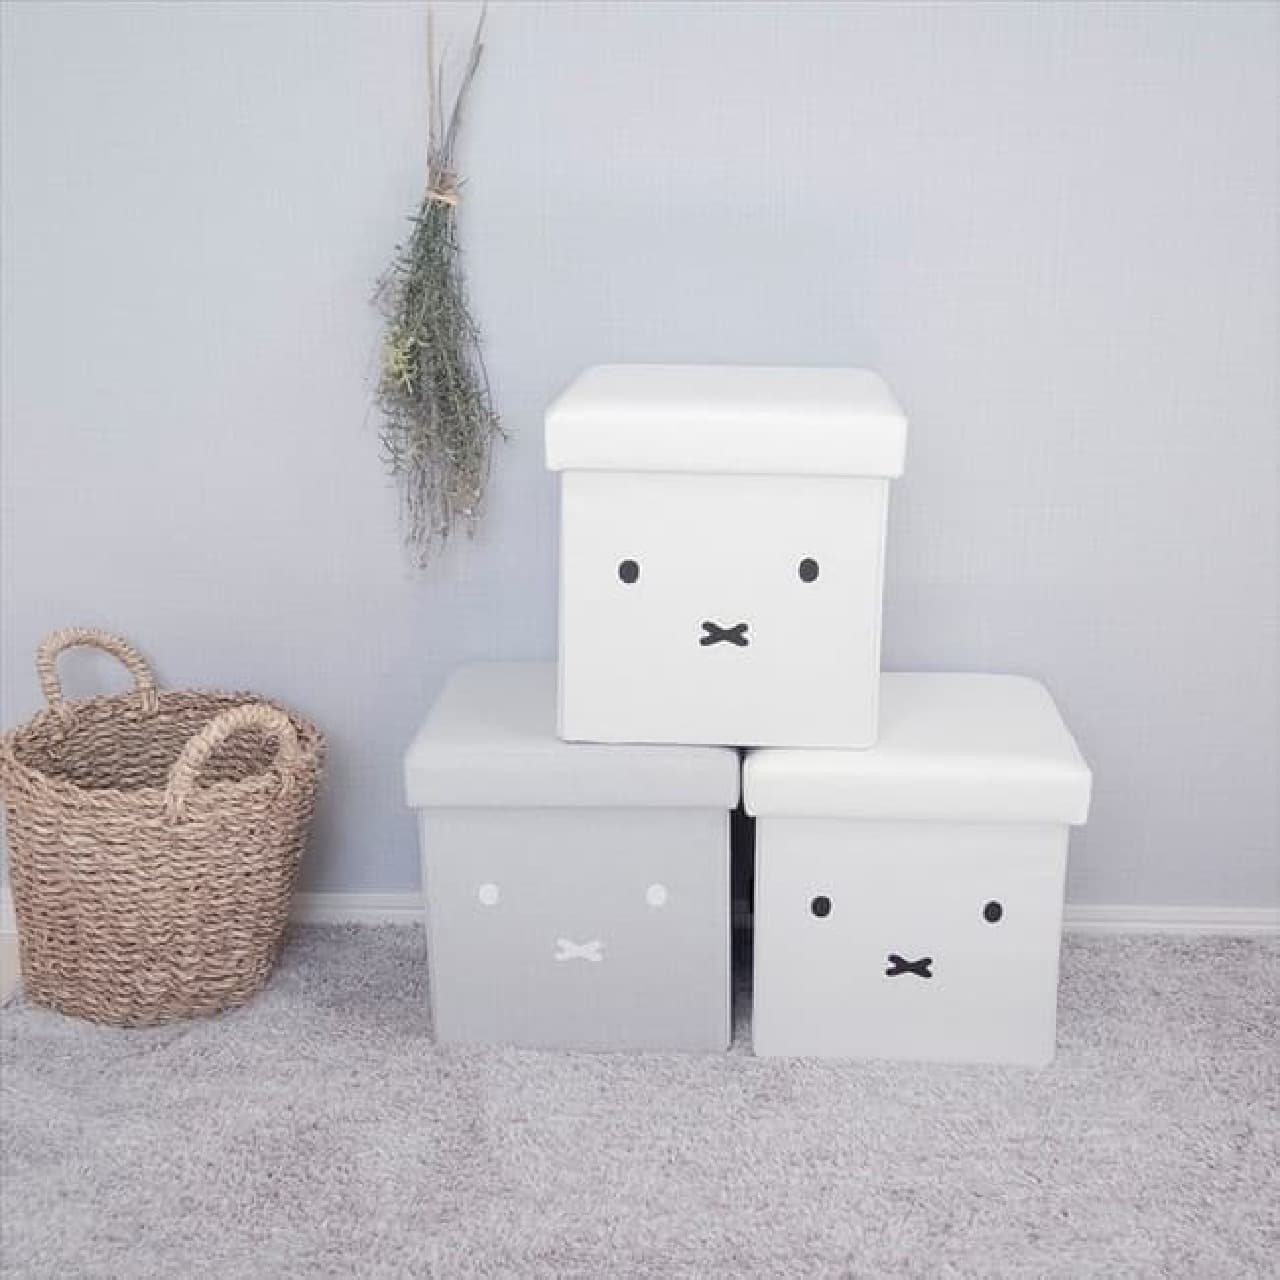 "[Miffy] Stool that can be stored" For Villevan --Three convenient roles of chair, storage box, and footrest